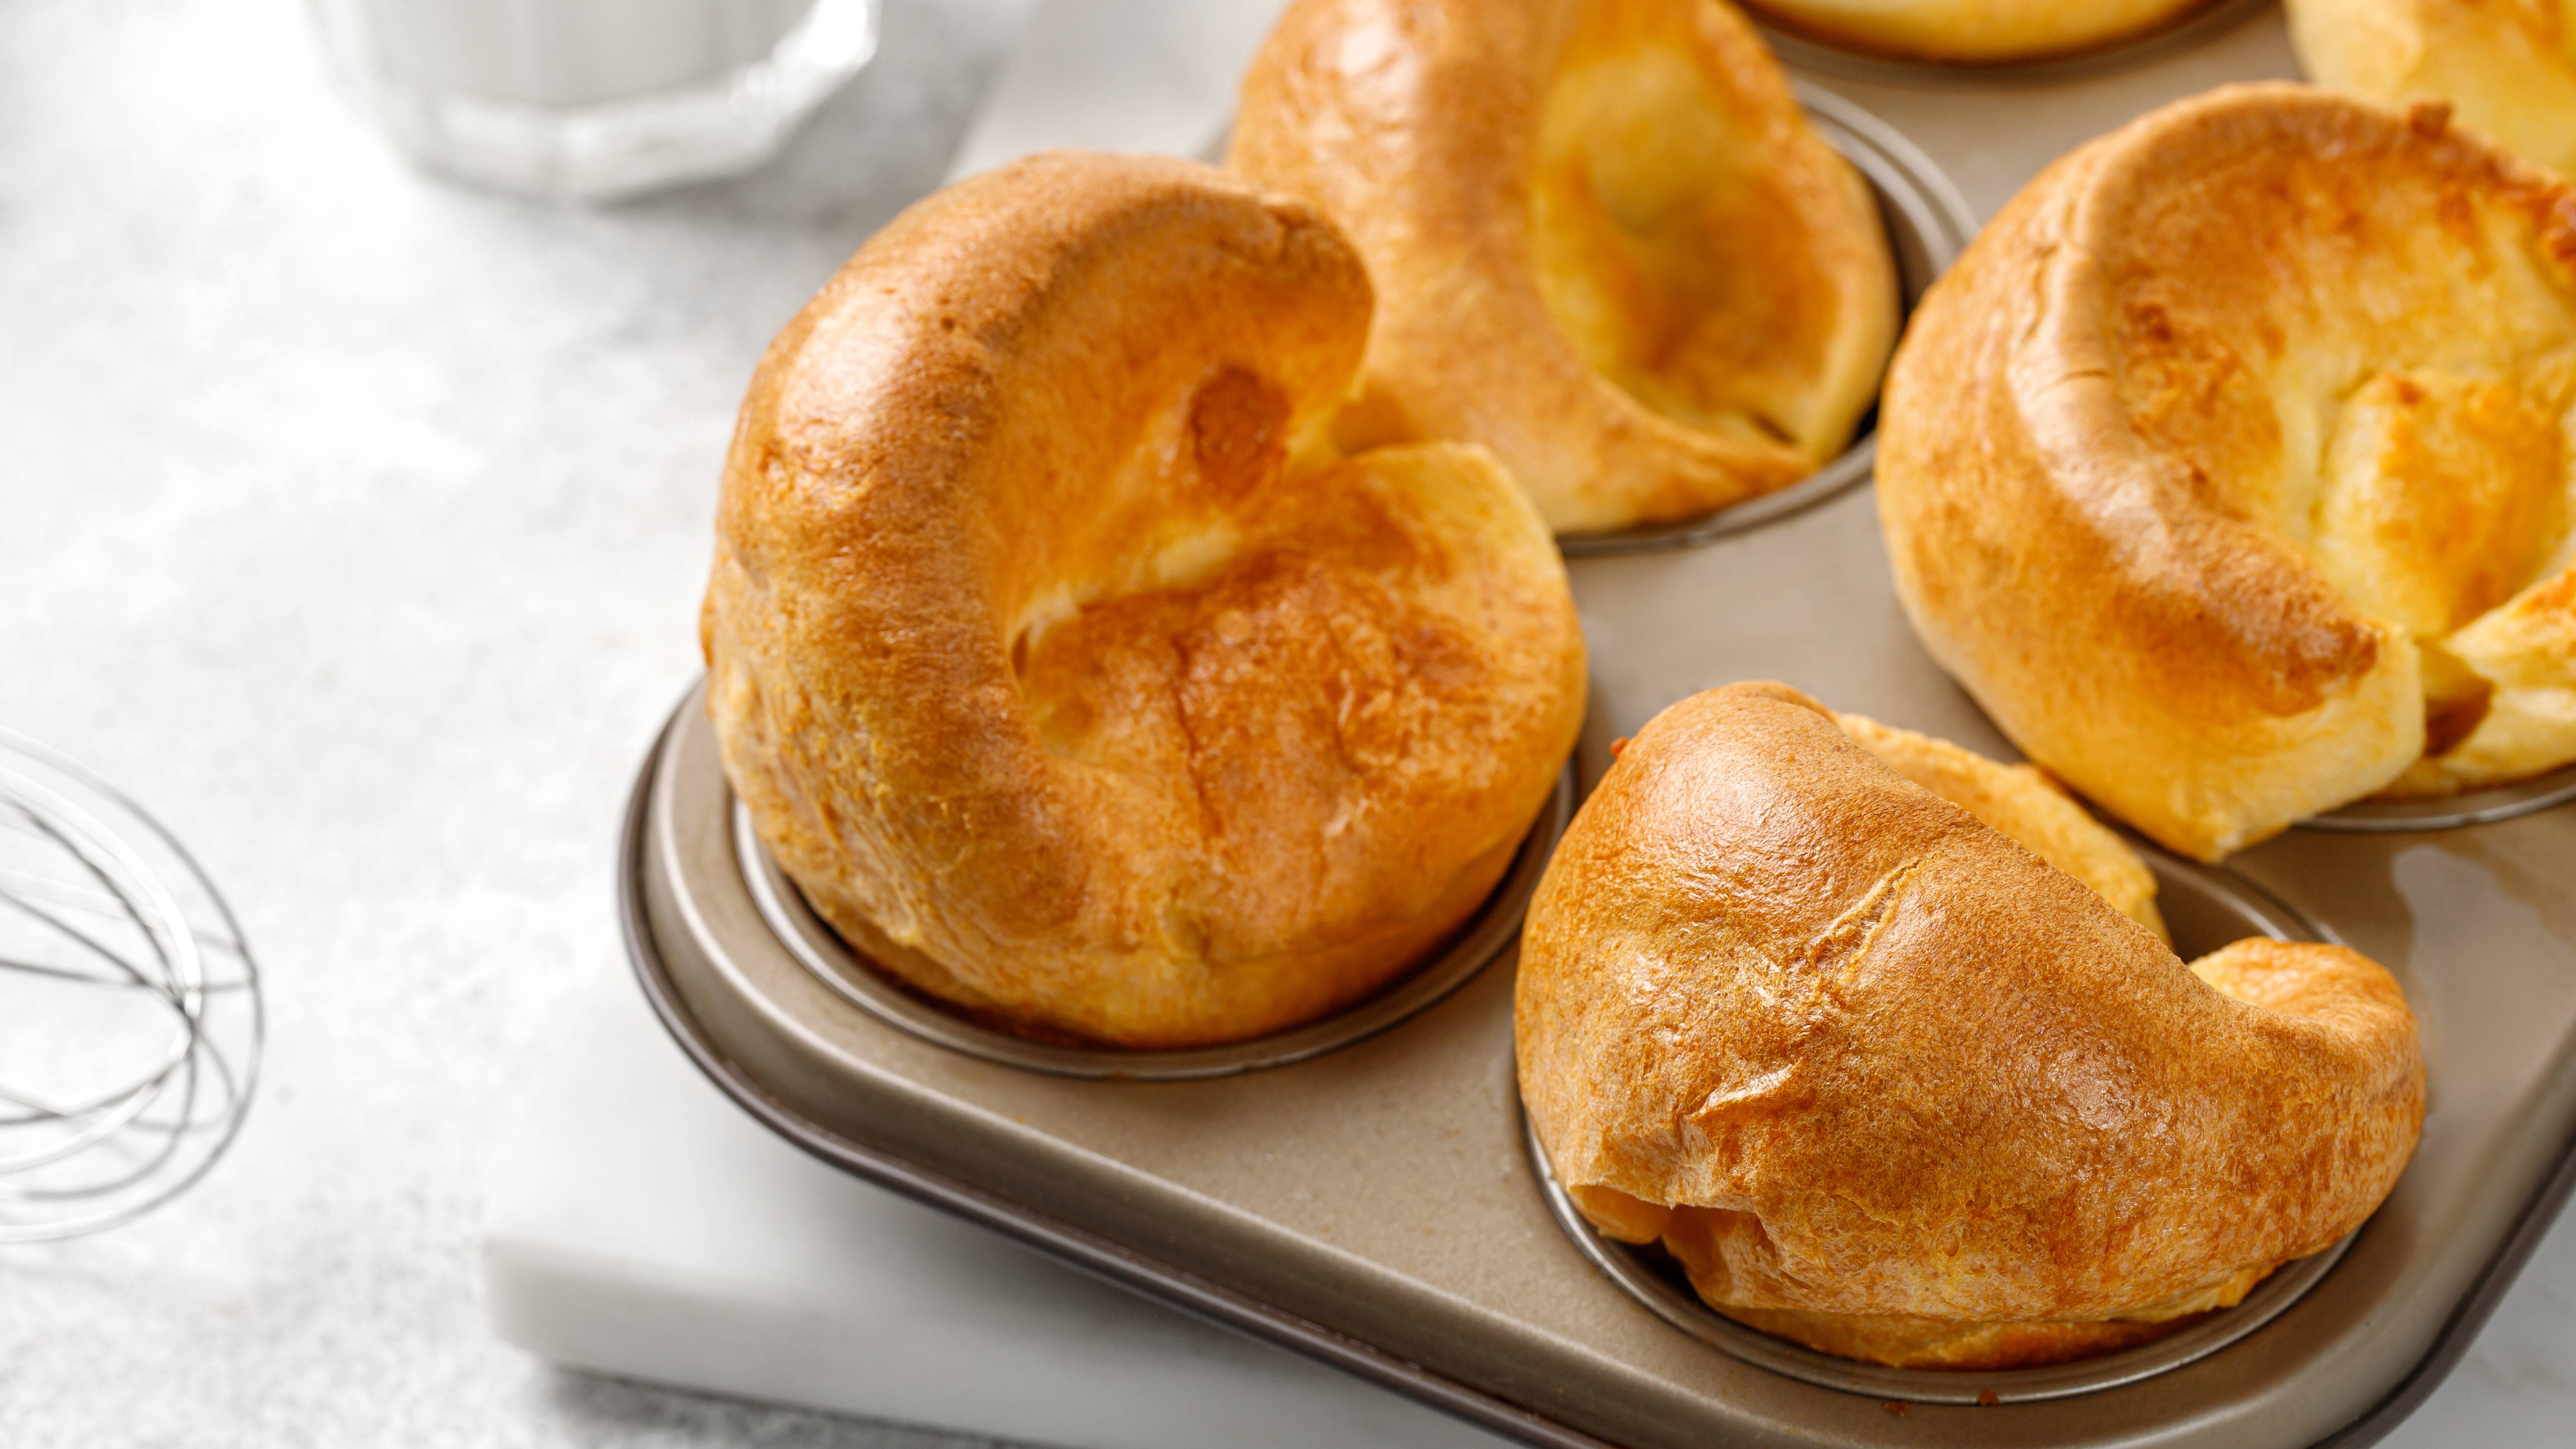 How to Make Yorkshire Puddings